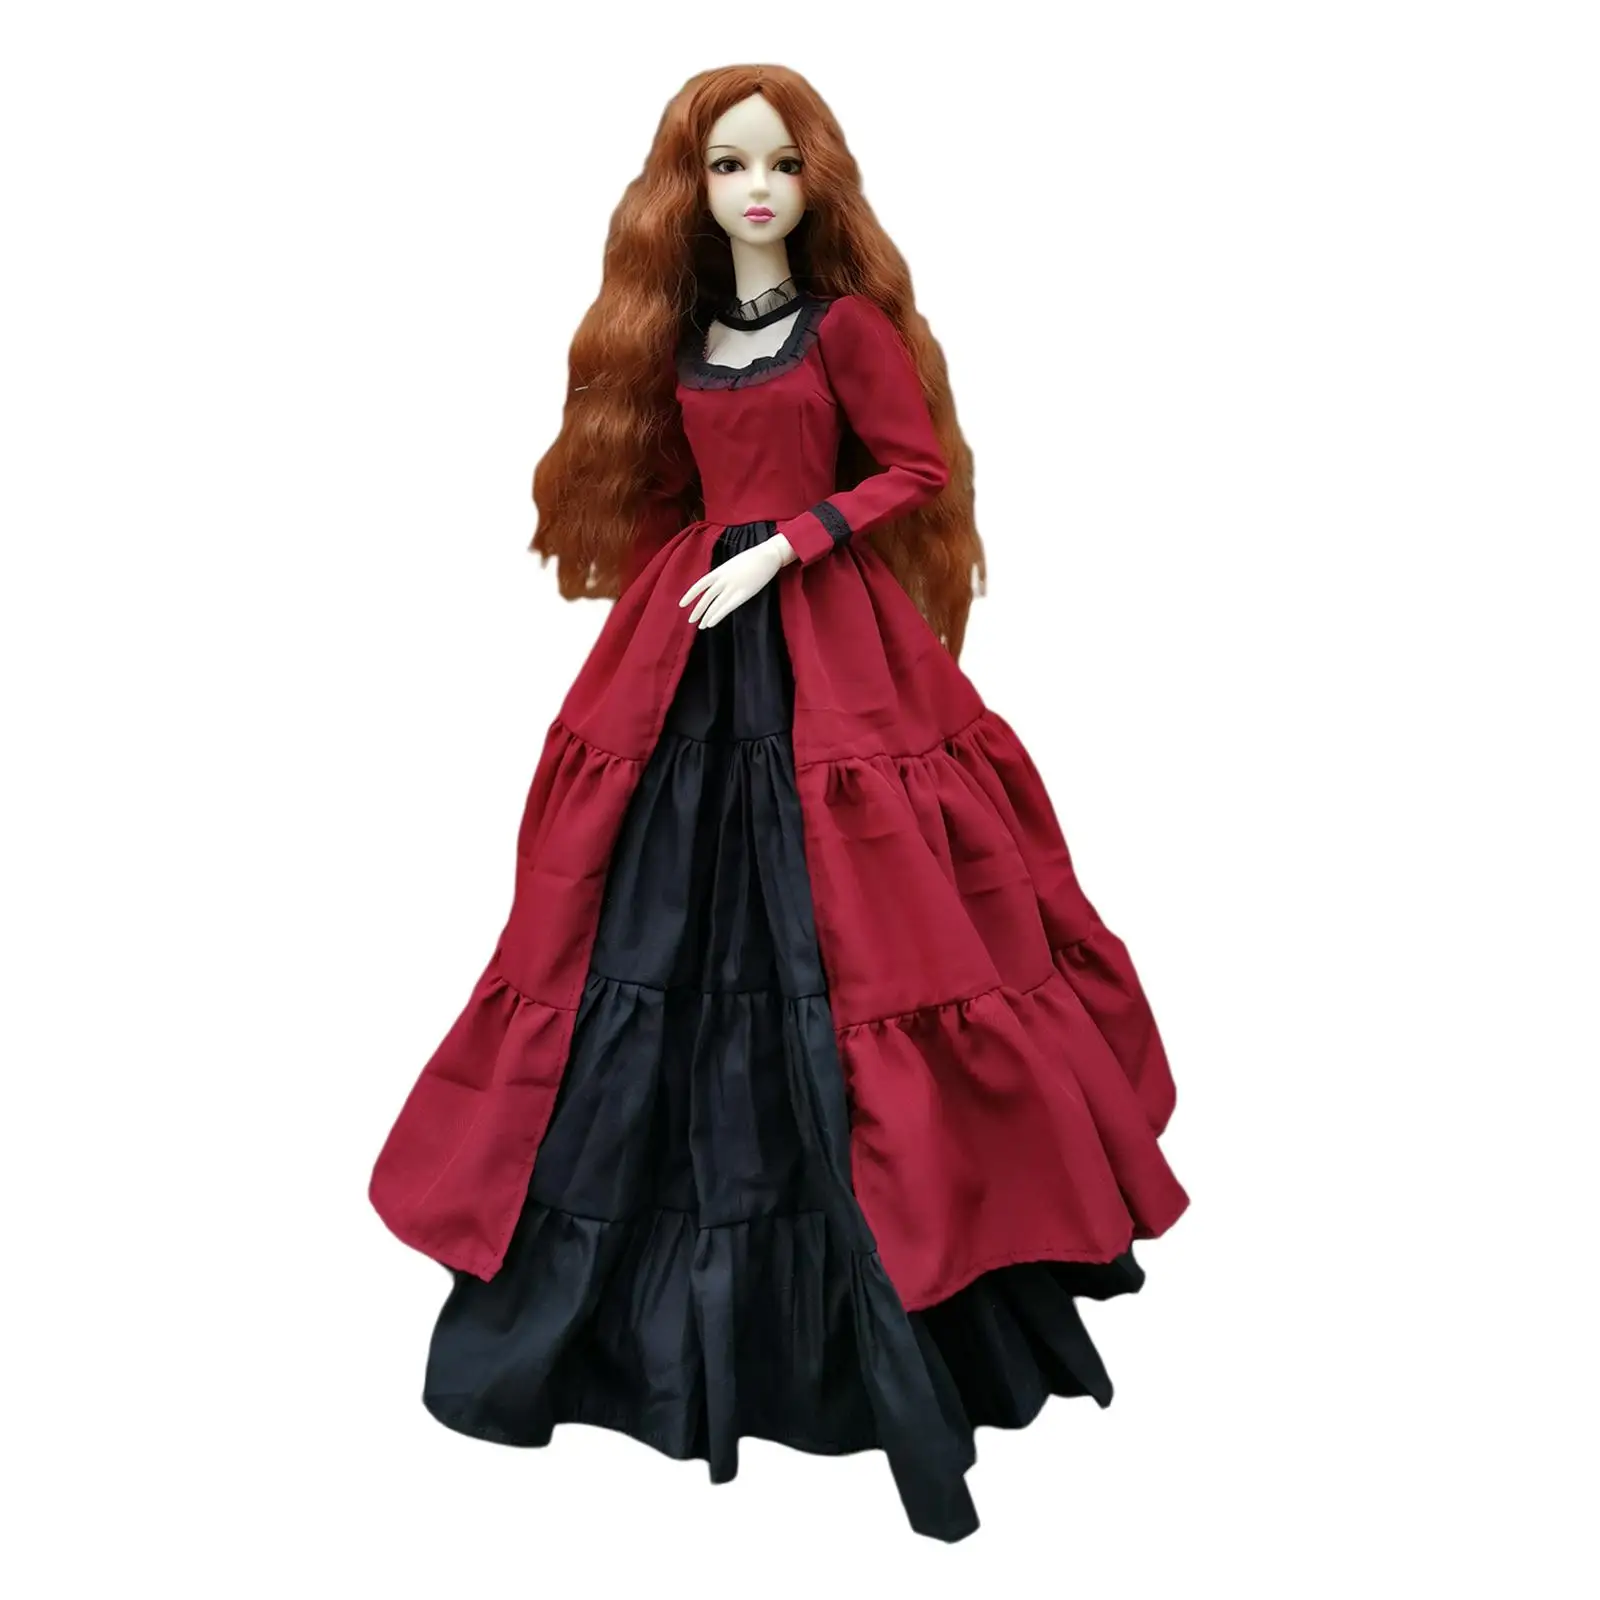 Ball Jointed Doll 1/3 Dolls with Beautiful Doll Clothes and Doll Fashion for Thanksgiving Women